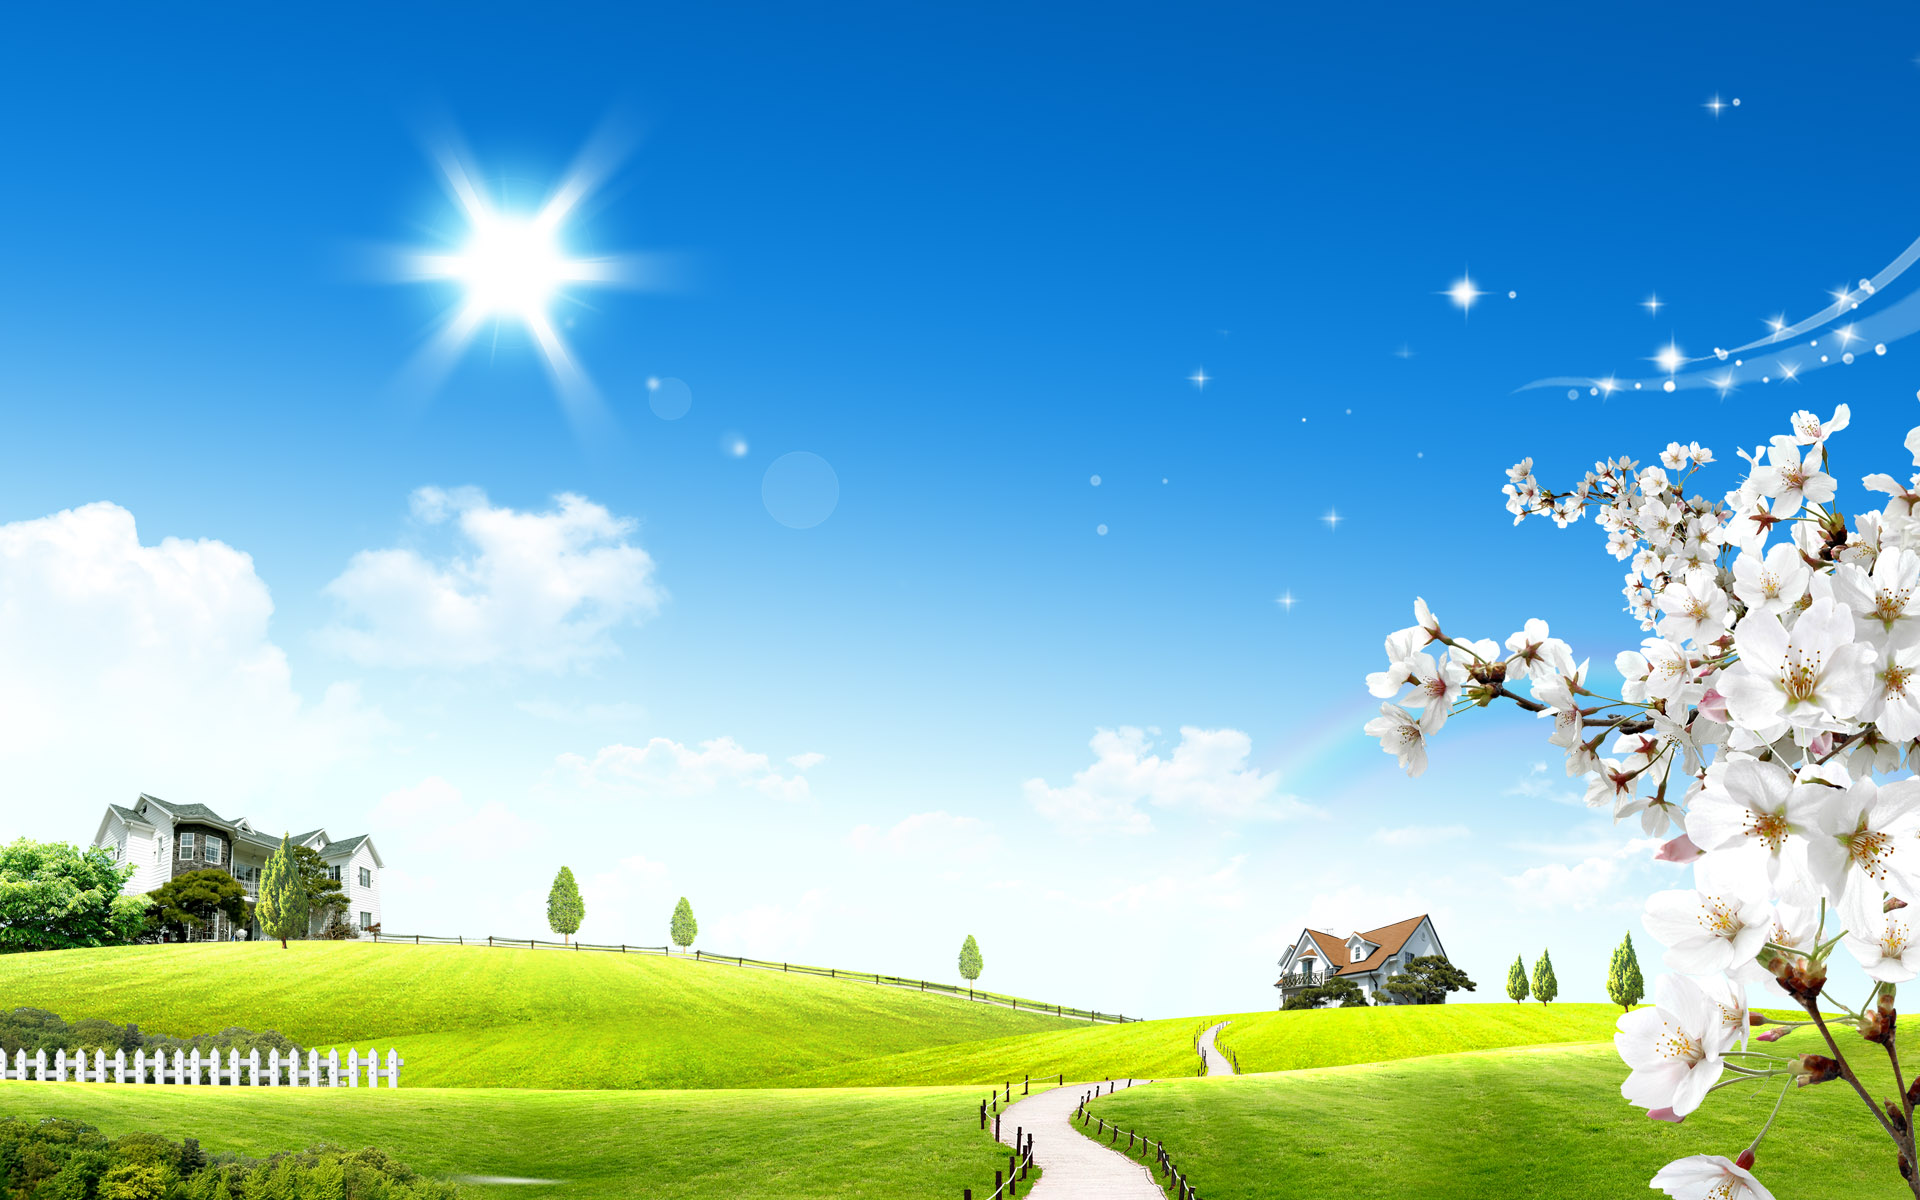 This free scenery wallpaper shows bright sun glow. The white flowers seem to be making a welcoming gesture, and near is a rainbow.